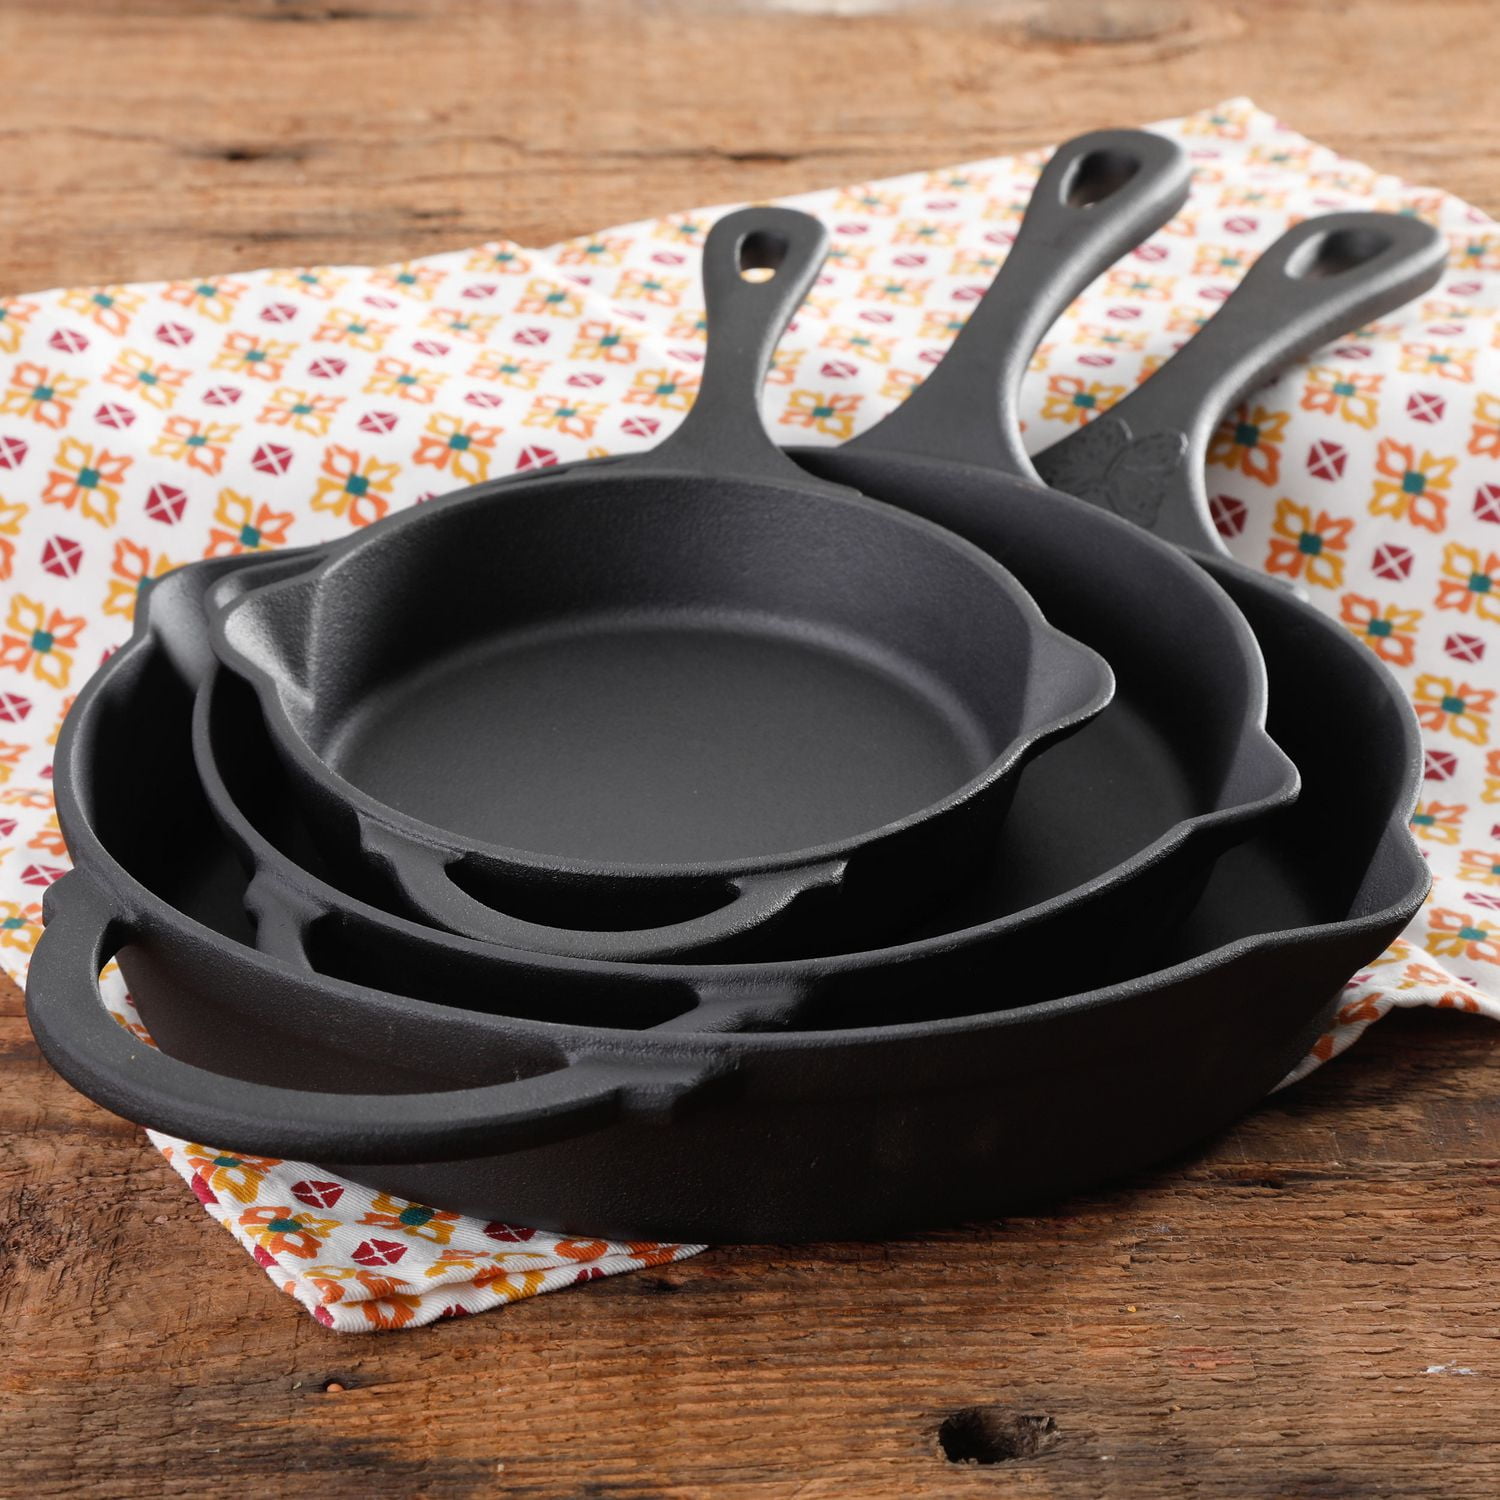 THE PIONEER WOMAN TIMELESS 3-PIECE CAST IRON SET 